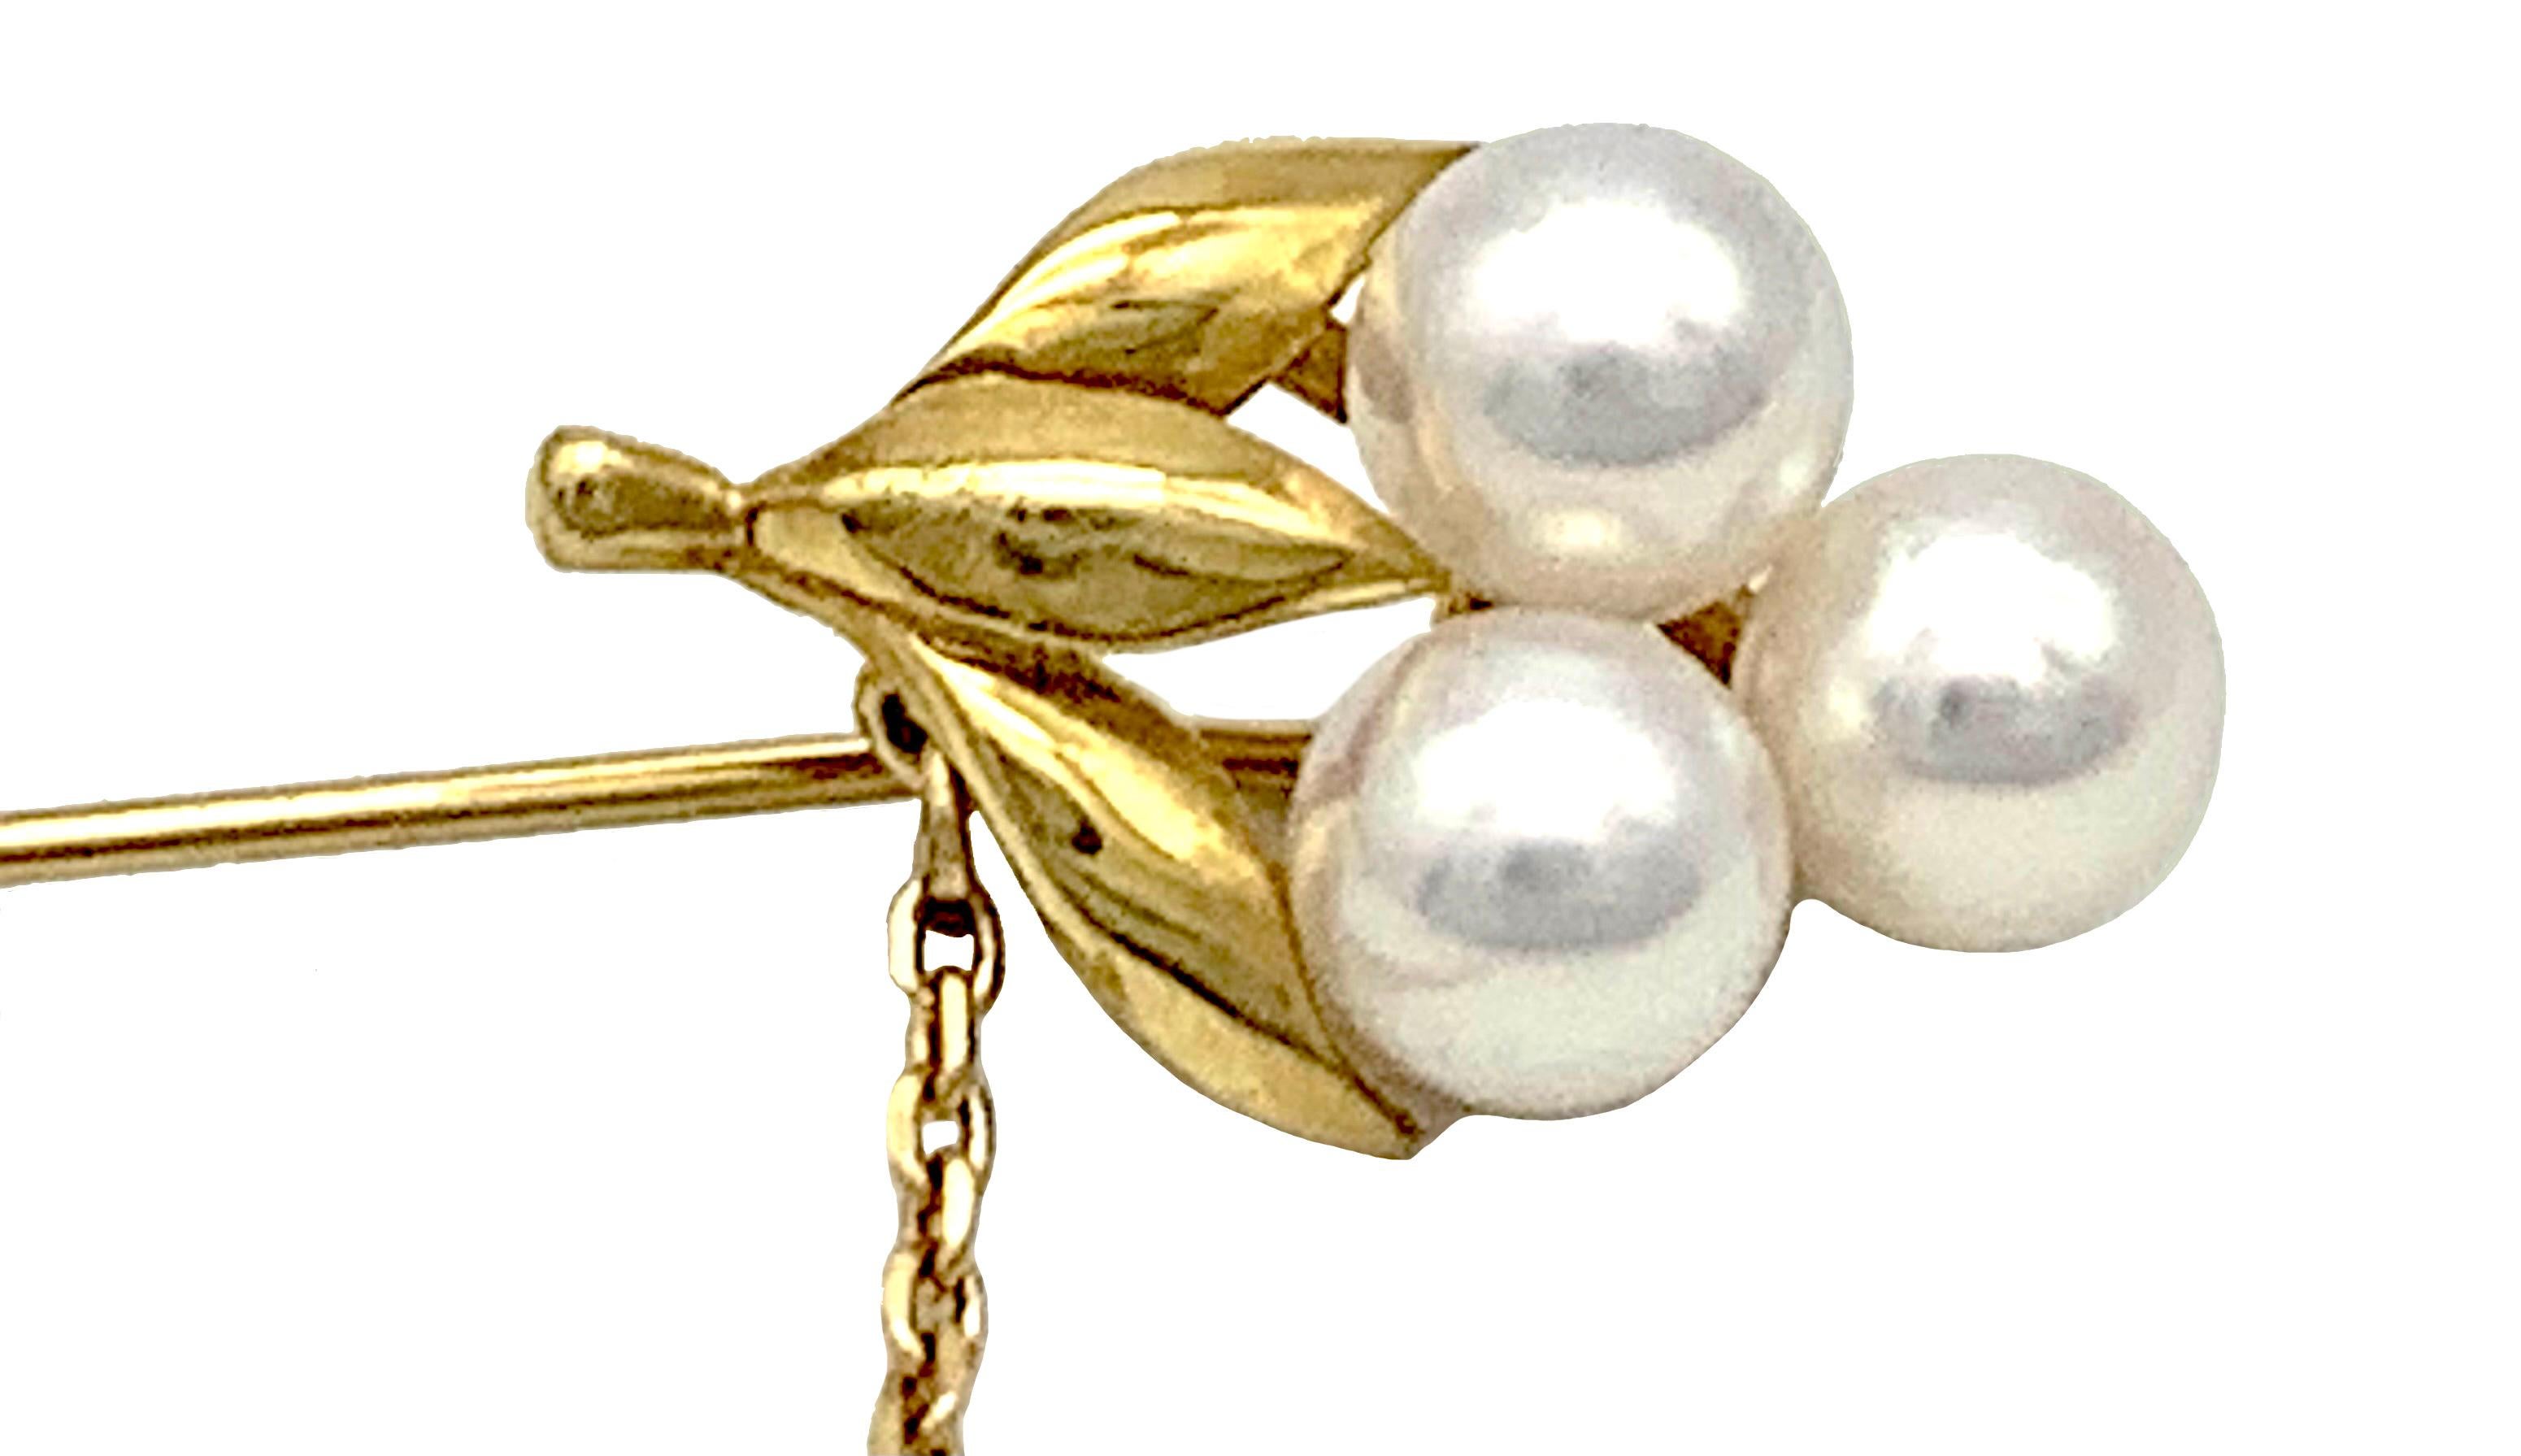 This stickpin has been made out of 18K gold in 1950 ca. The pin is designed as a little flower with three leaves. The flower is made up from three perfectly round white cultured pearls. The pin is equipped with a gold counter piece secured to the